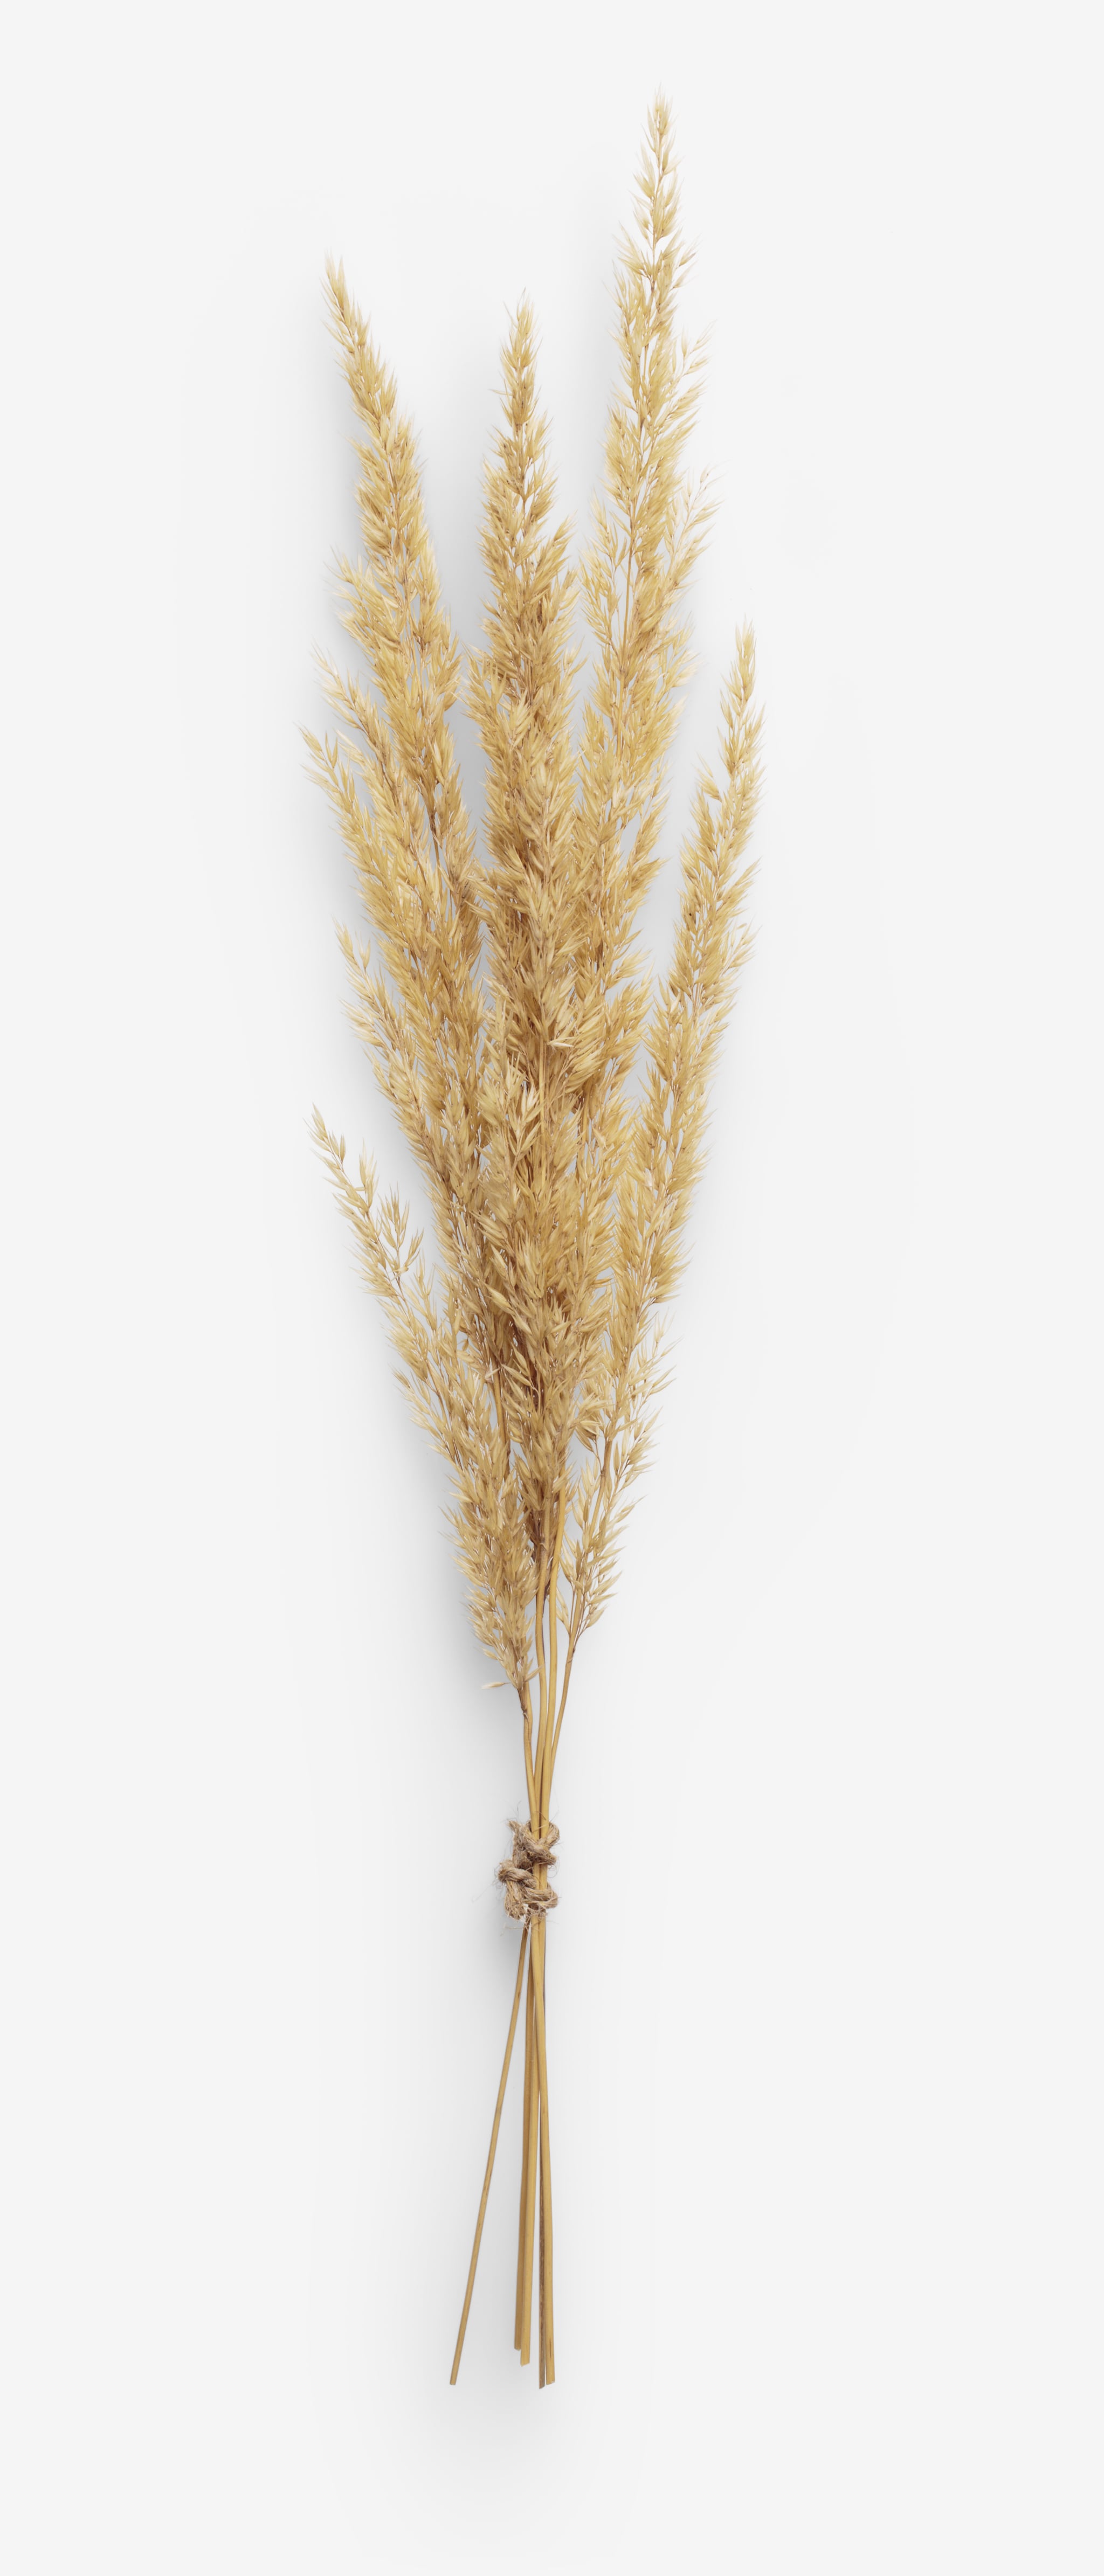 Spikelet image with transparent background